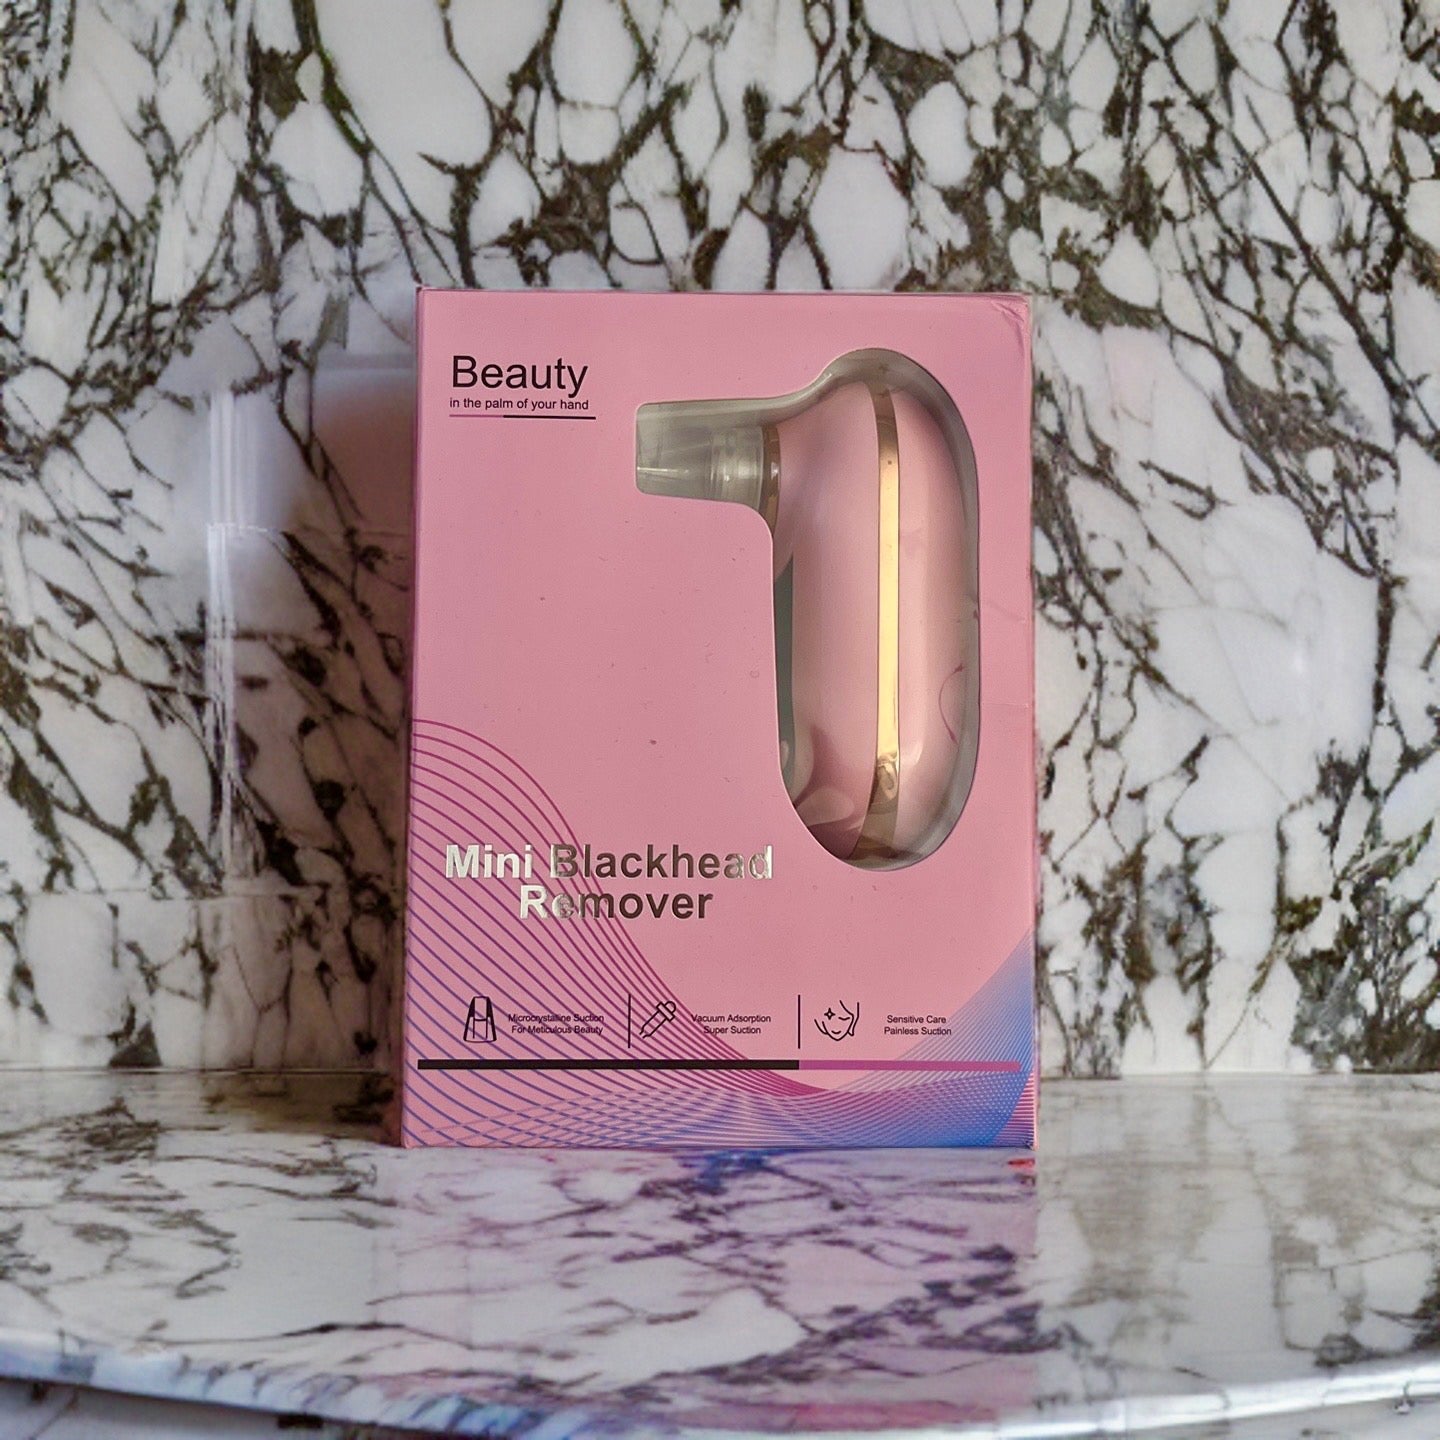 The Lux Glow Skin Care Mini Blackhead Remover is the perfect addition to your skin care beauty tool collection. It reaches deep into the pores with its vacuum-like suction to pull out dirt and bacteria on the top layers of the skin.  The kit includes a charging cable for the ultimate convenience. No batteries required.